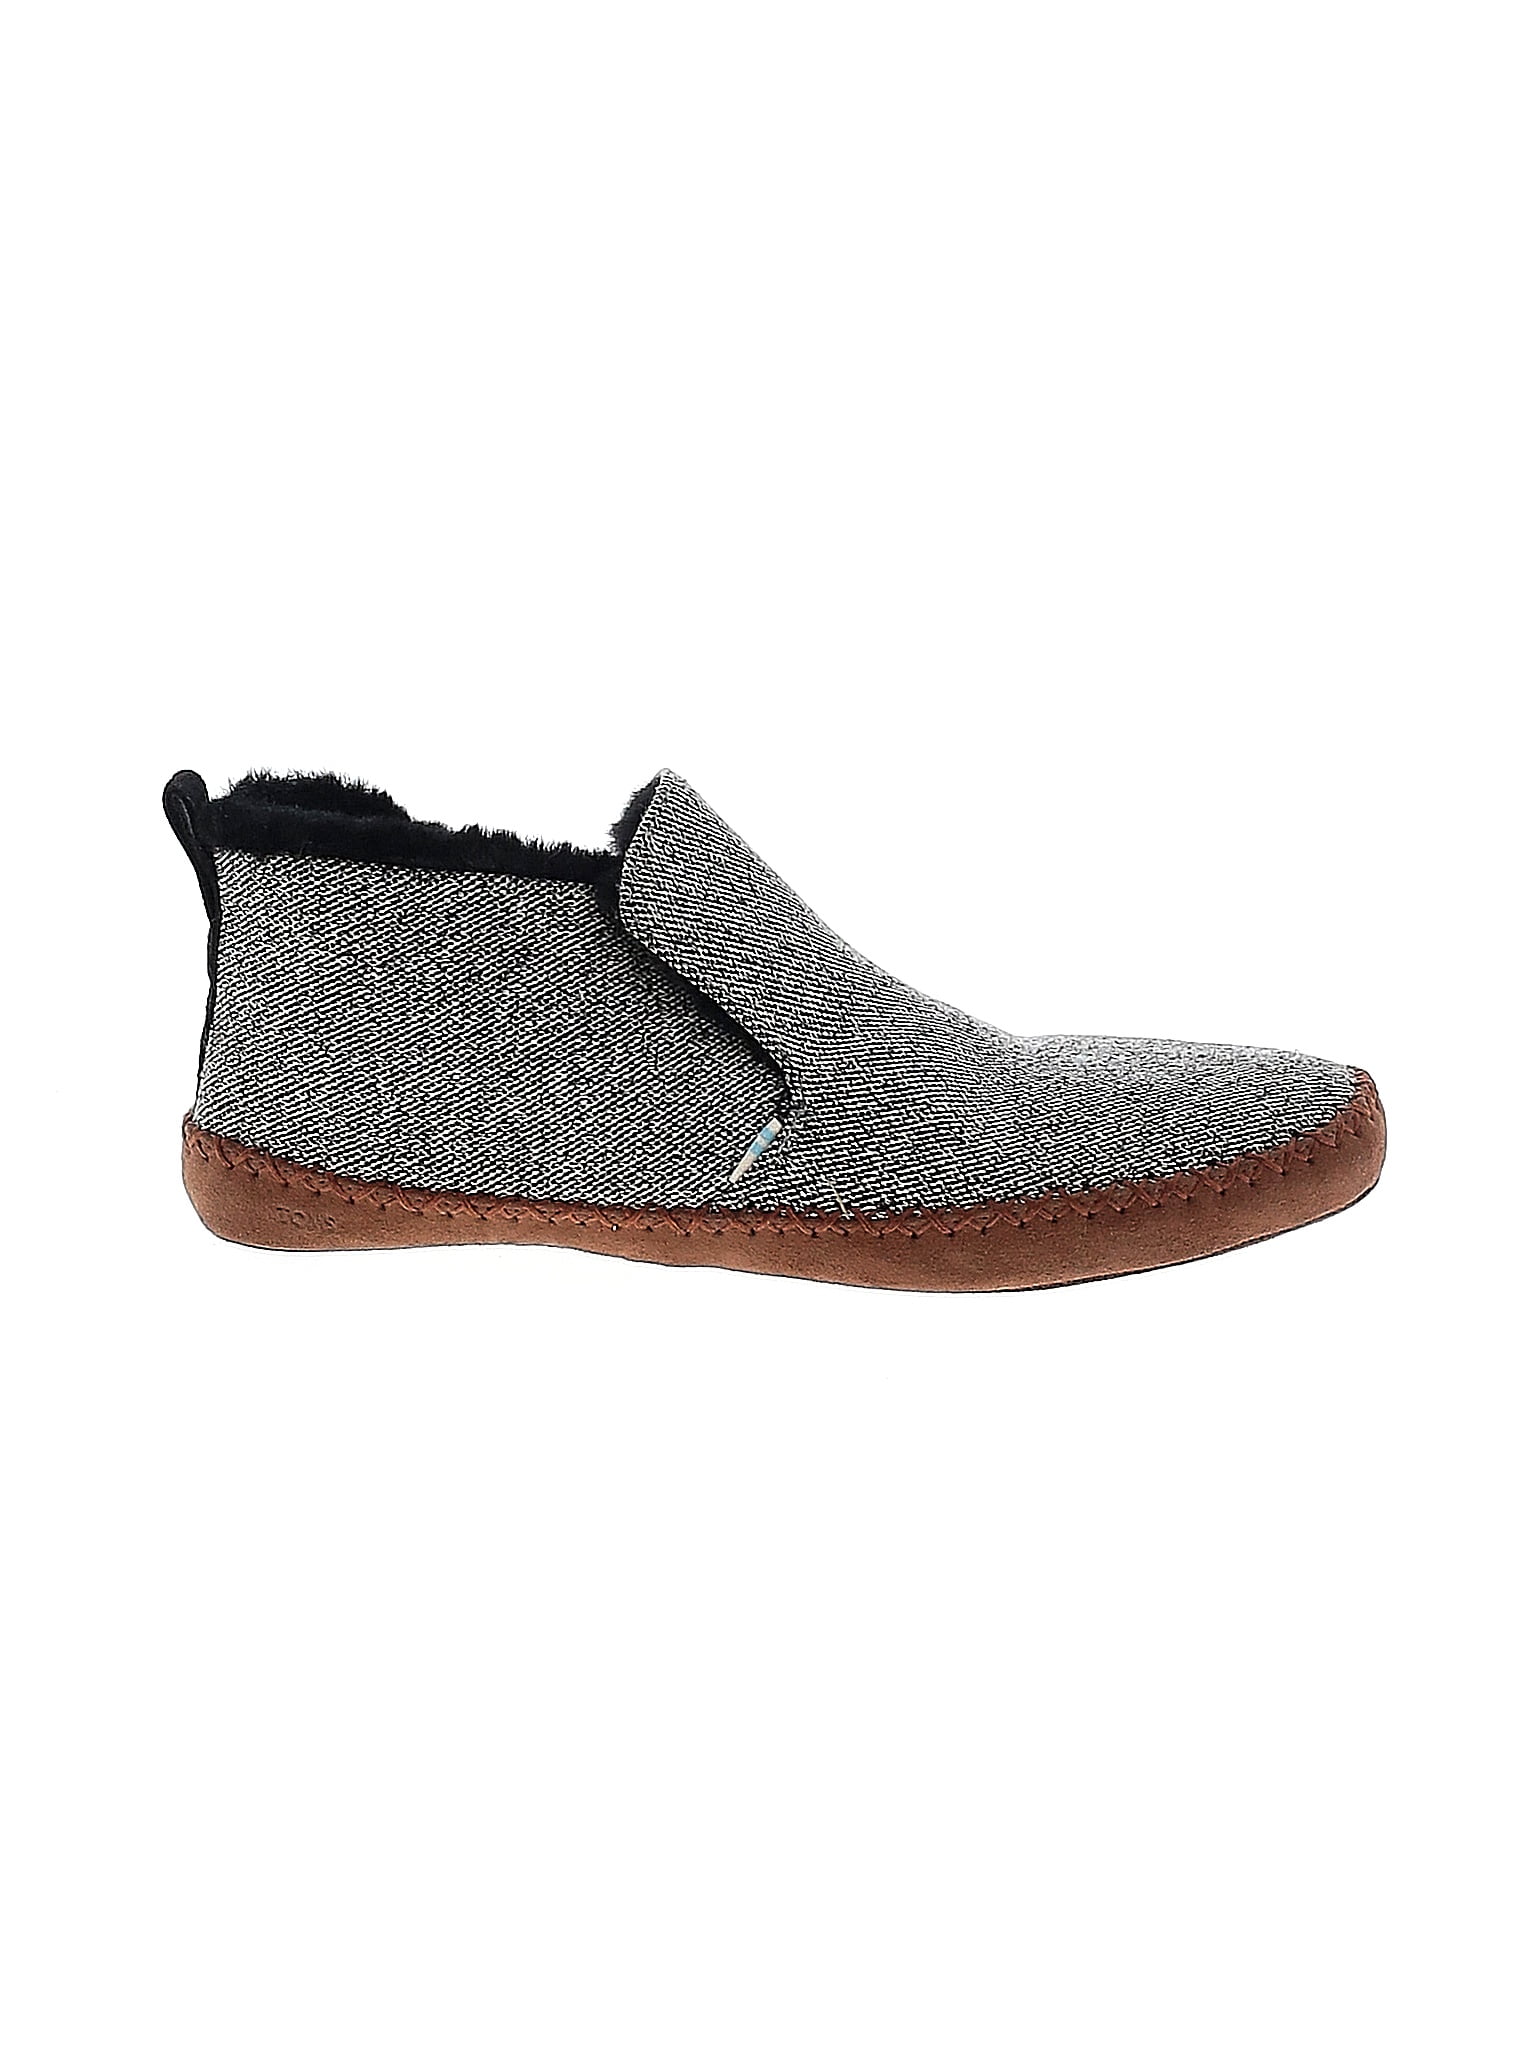 TOMS Gray Ankle Boots Size 7 - 57% off | thredUP